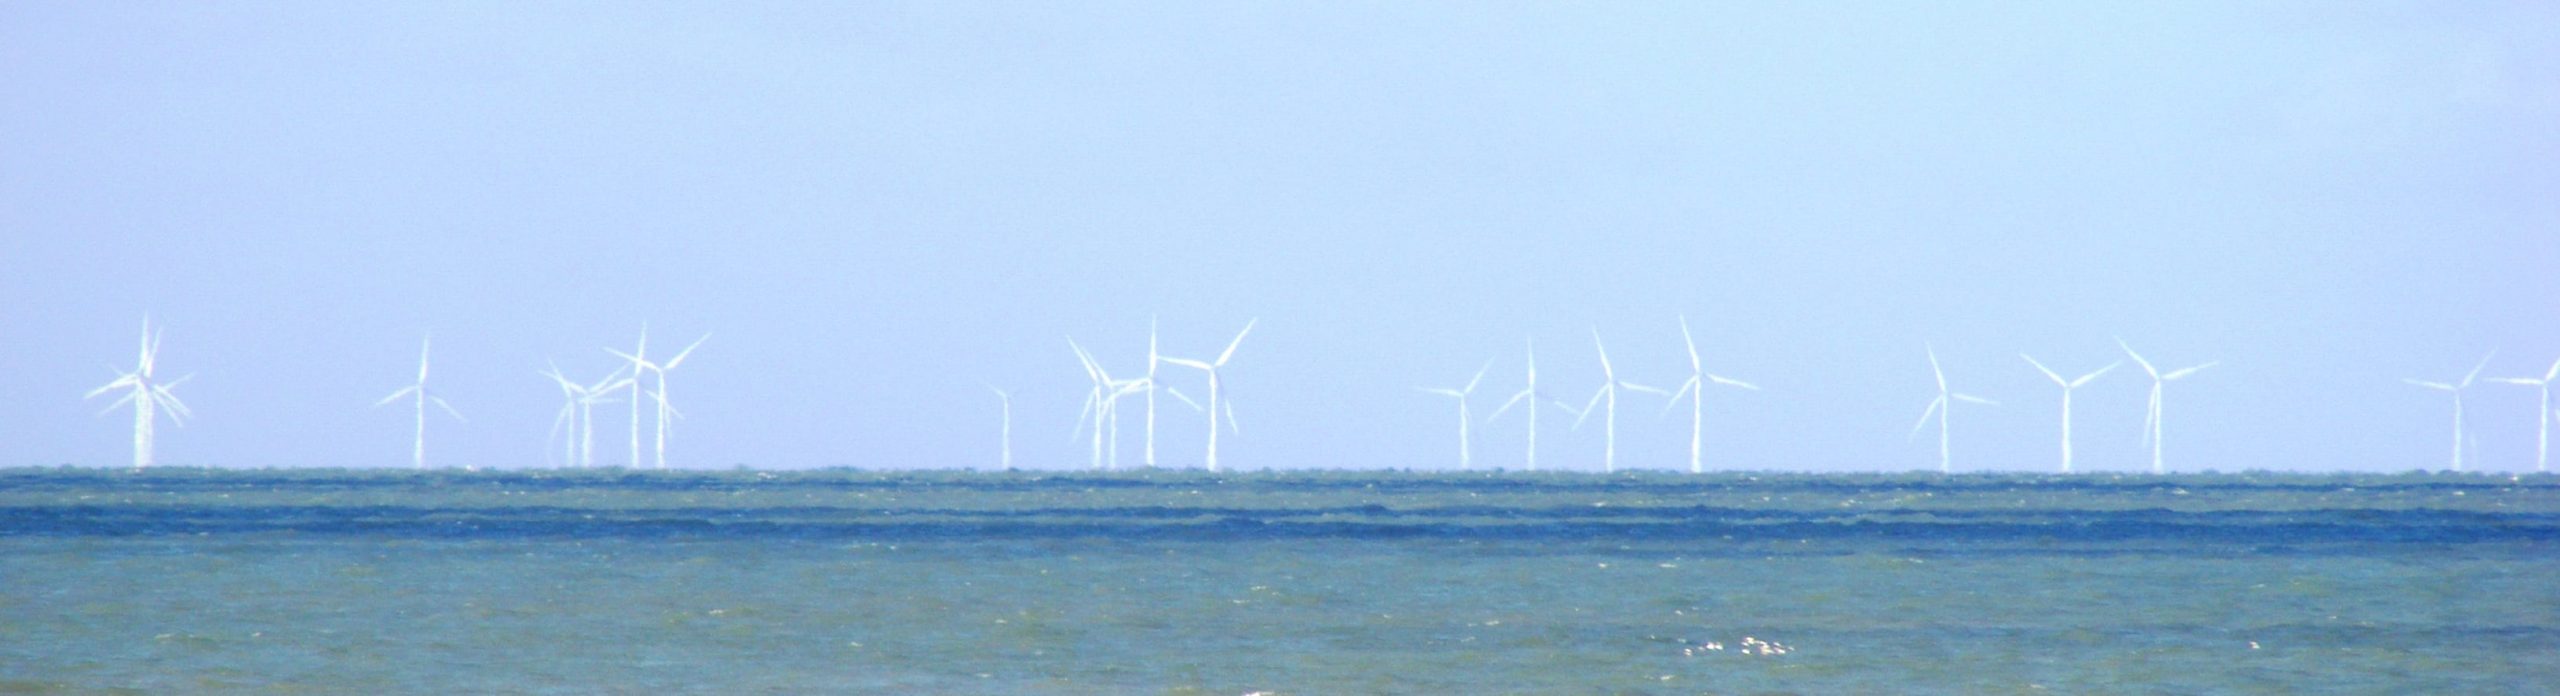 Offshore Wind Energy System